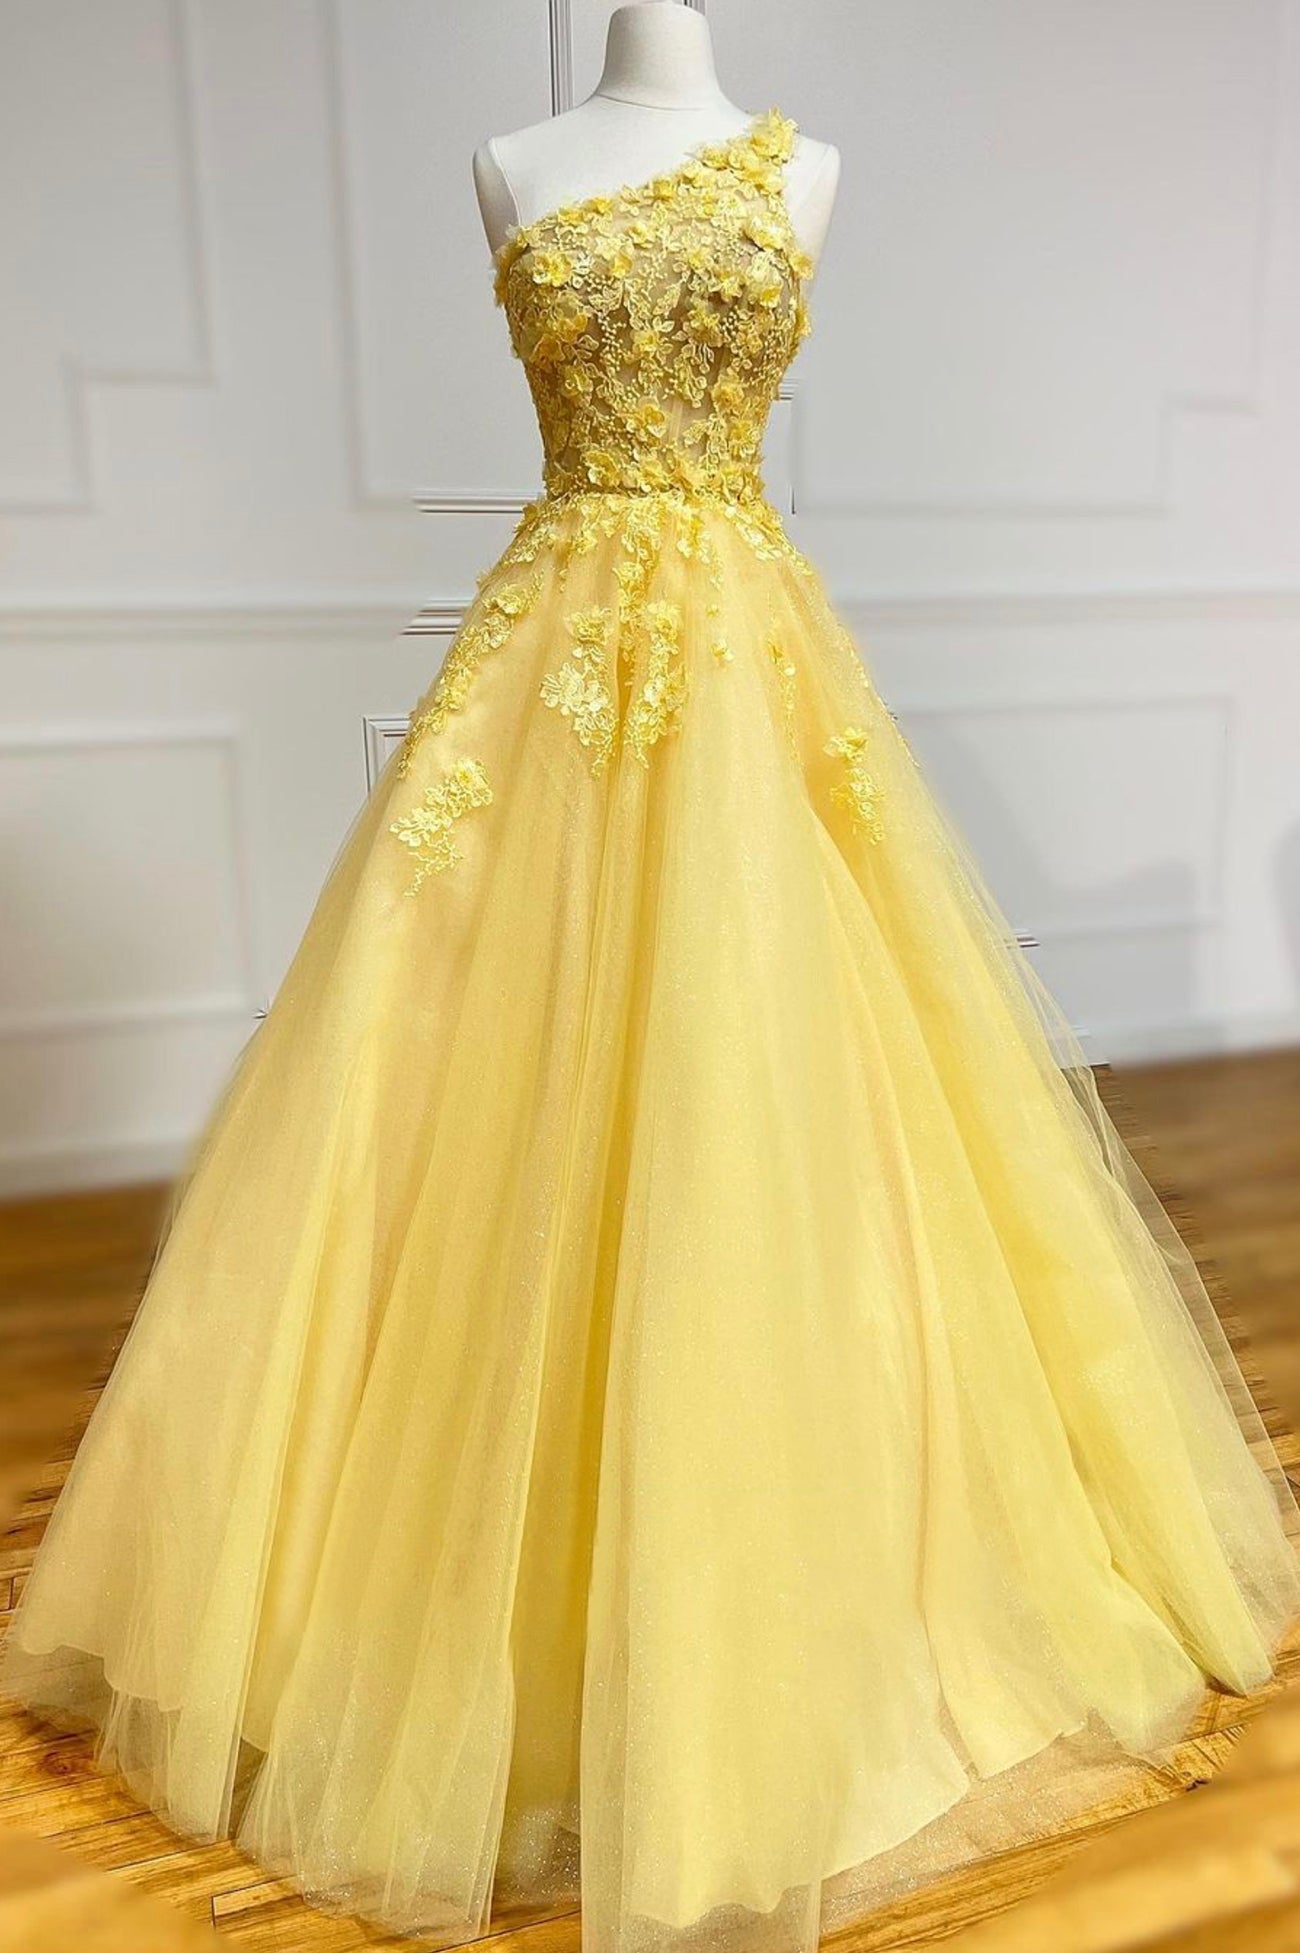 Party Dresses Modest, Yellow Lace One Shoulder Evening Dress, A-Line Tulle Long Prom Dress